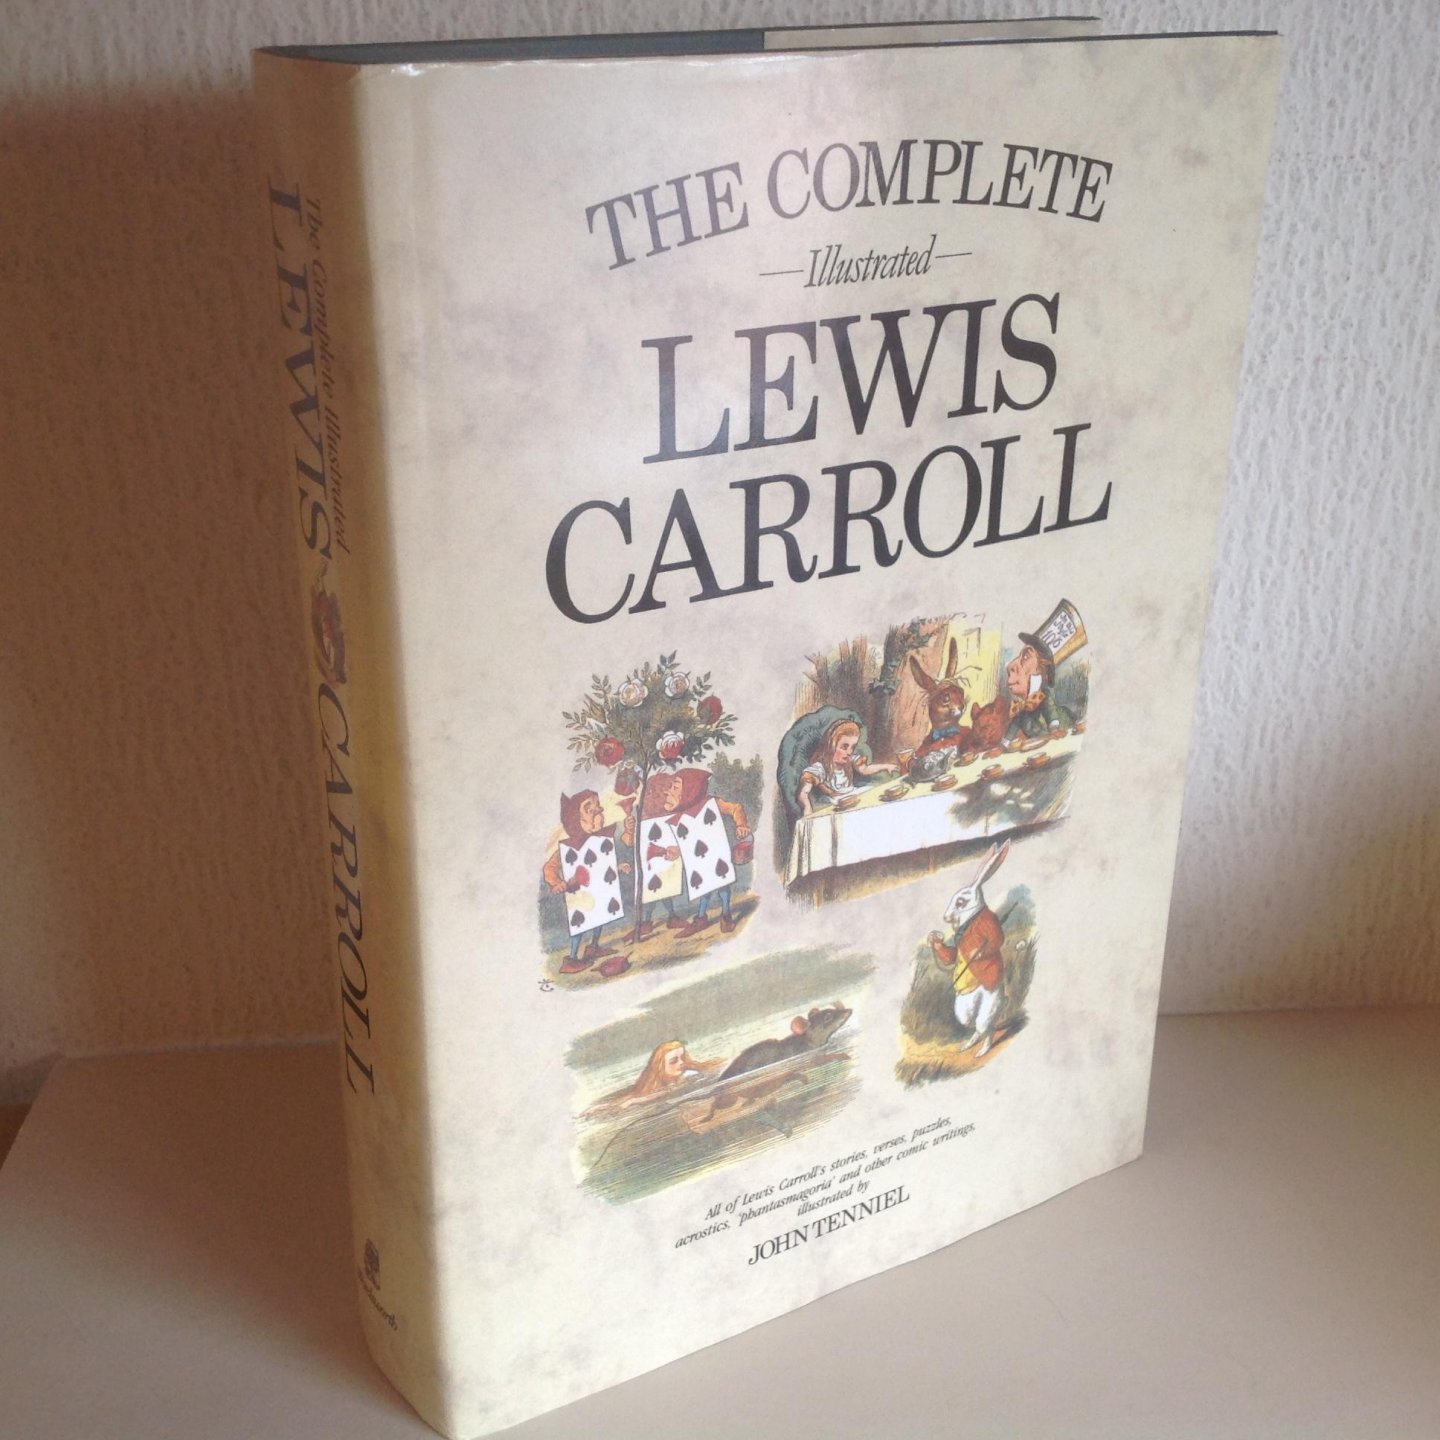 John Tenniel - THE COMPLETE illustrated LEWIS CARROLL